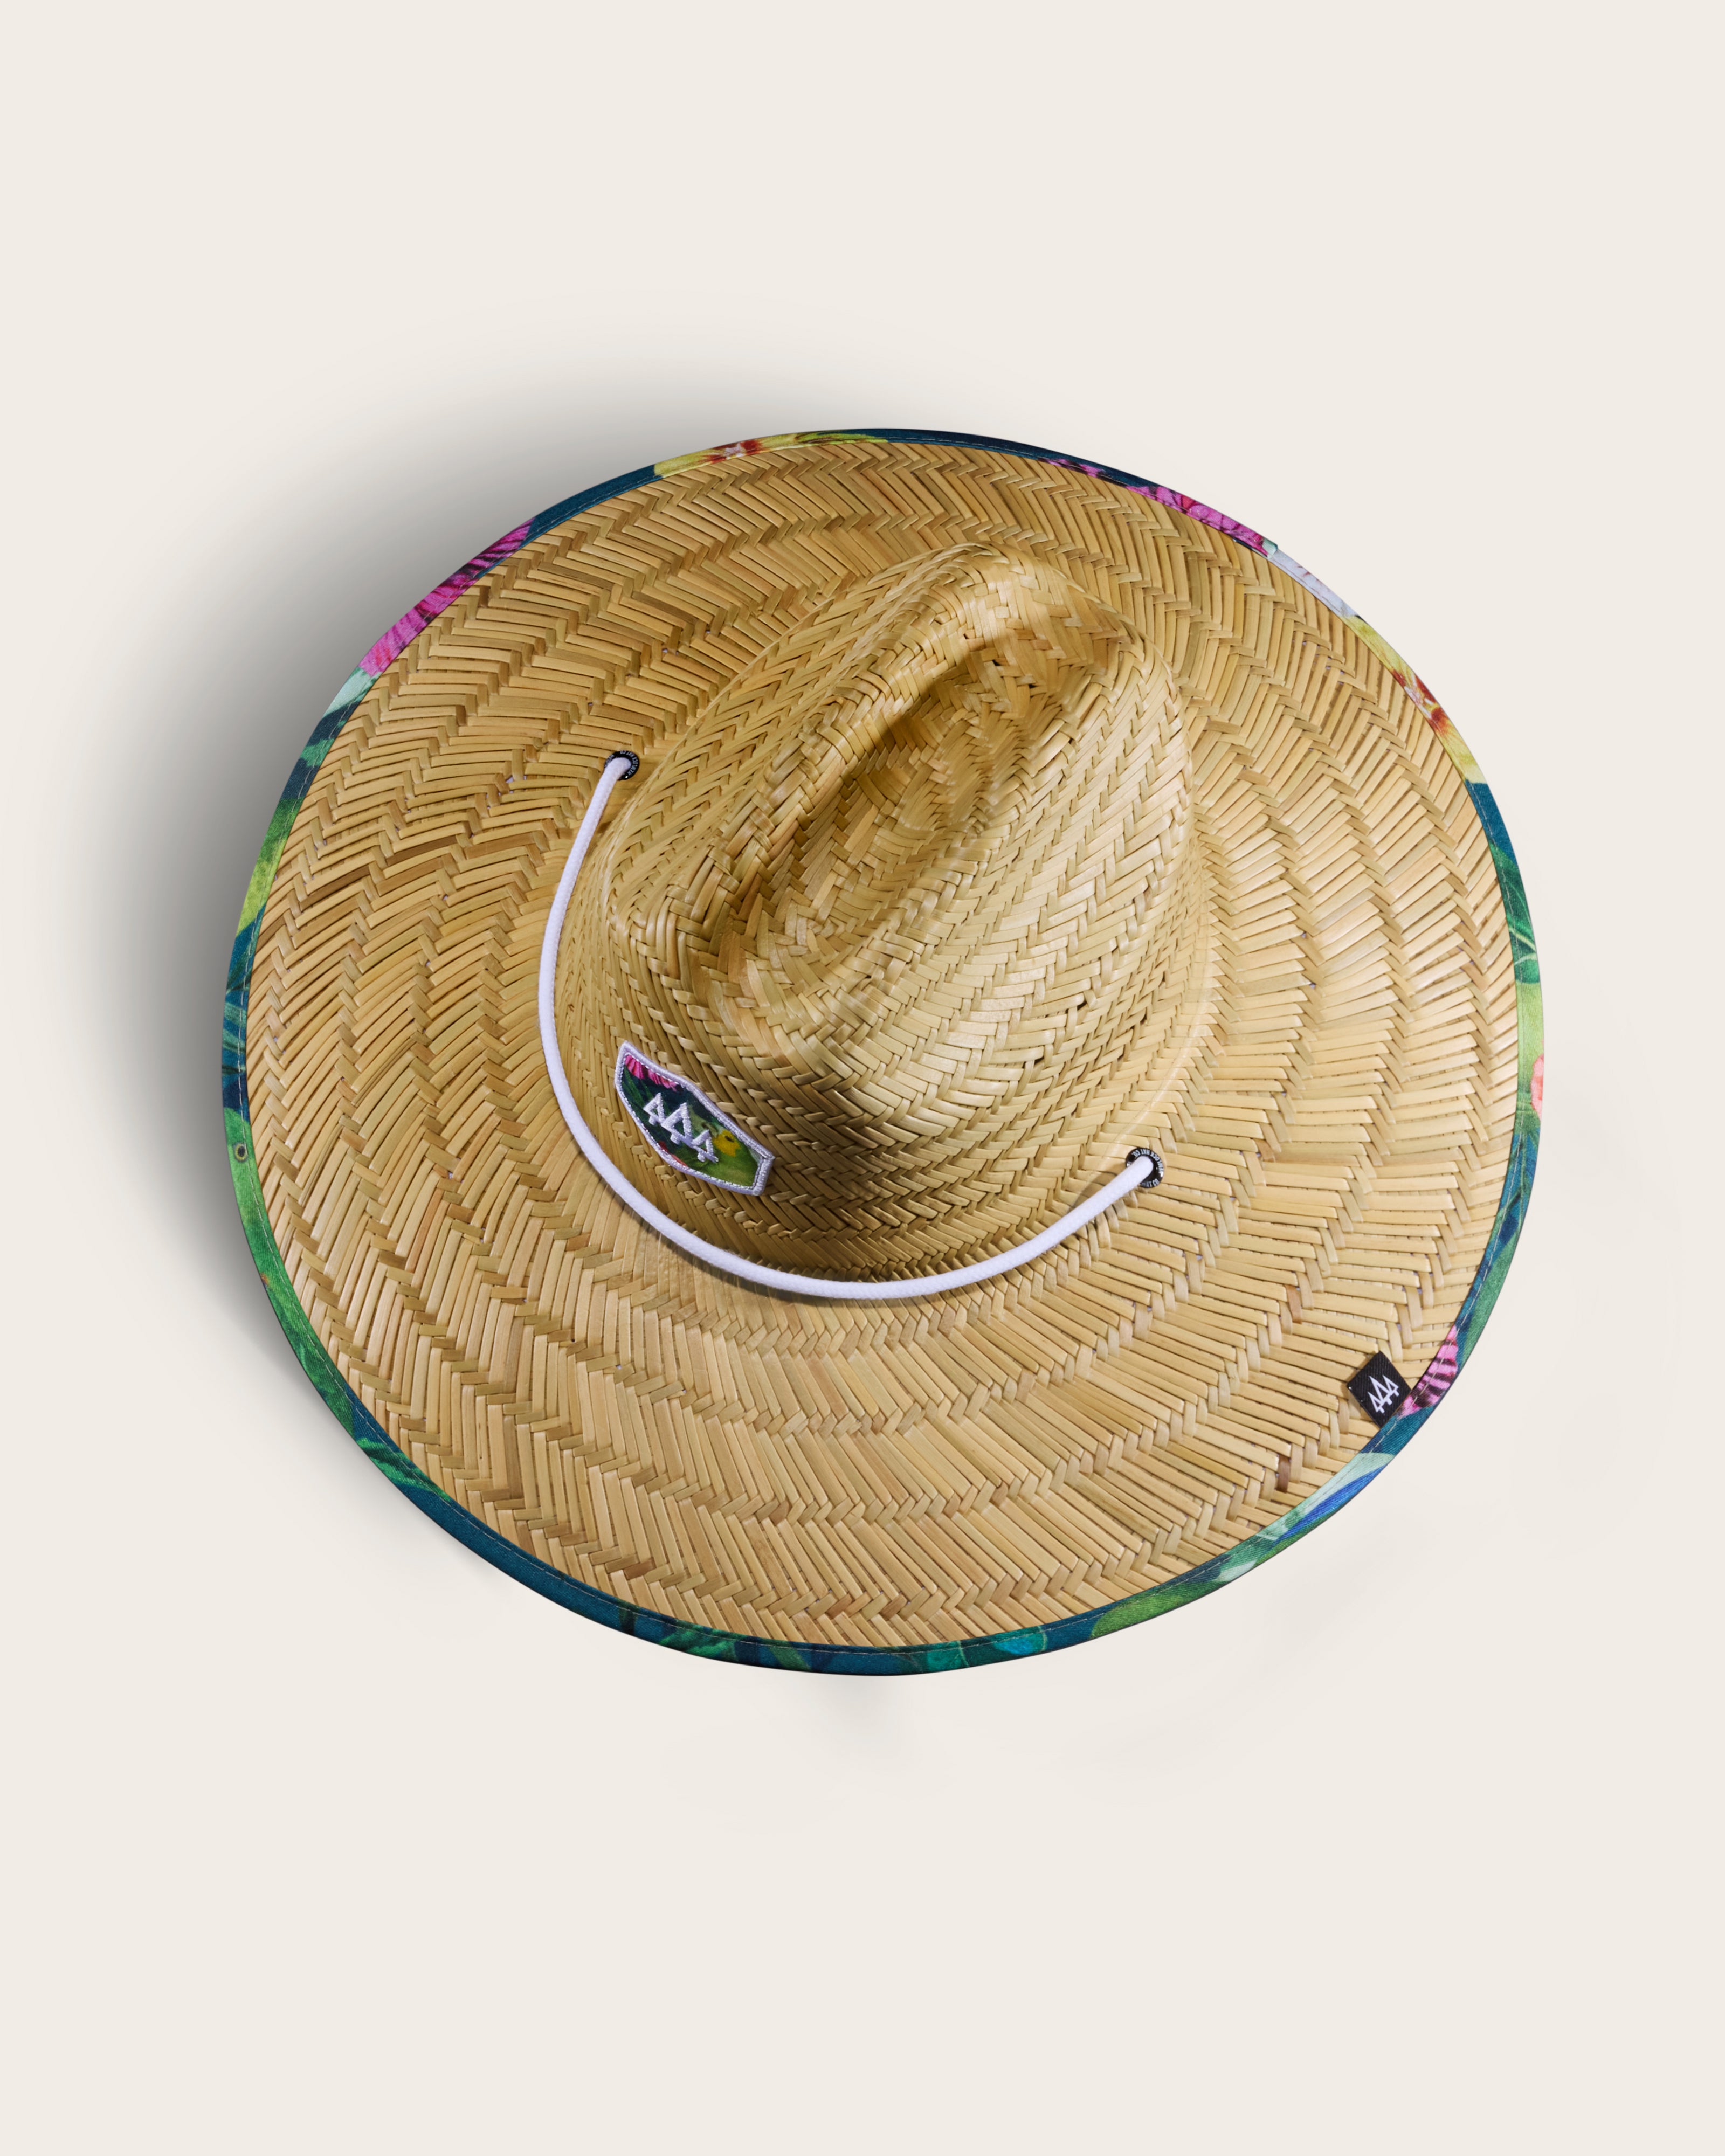 Hemlock Caicos straw lifeguard hat with Green Parrot pattern top of hat